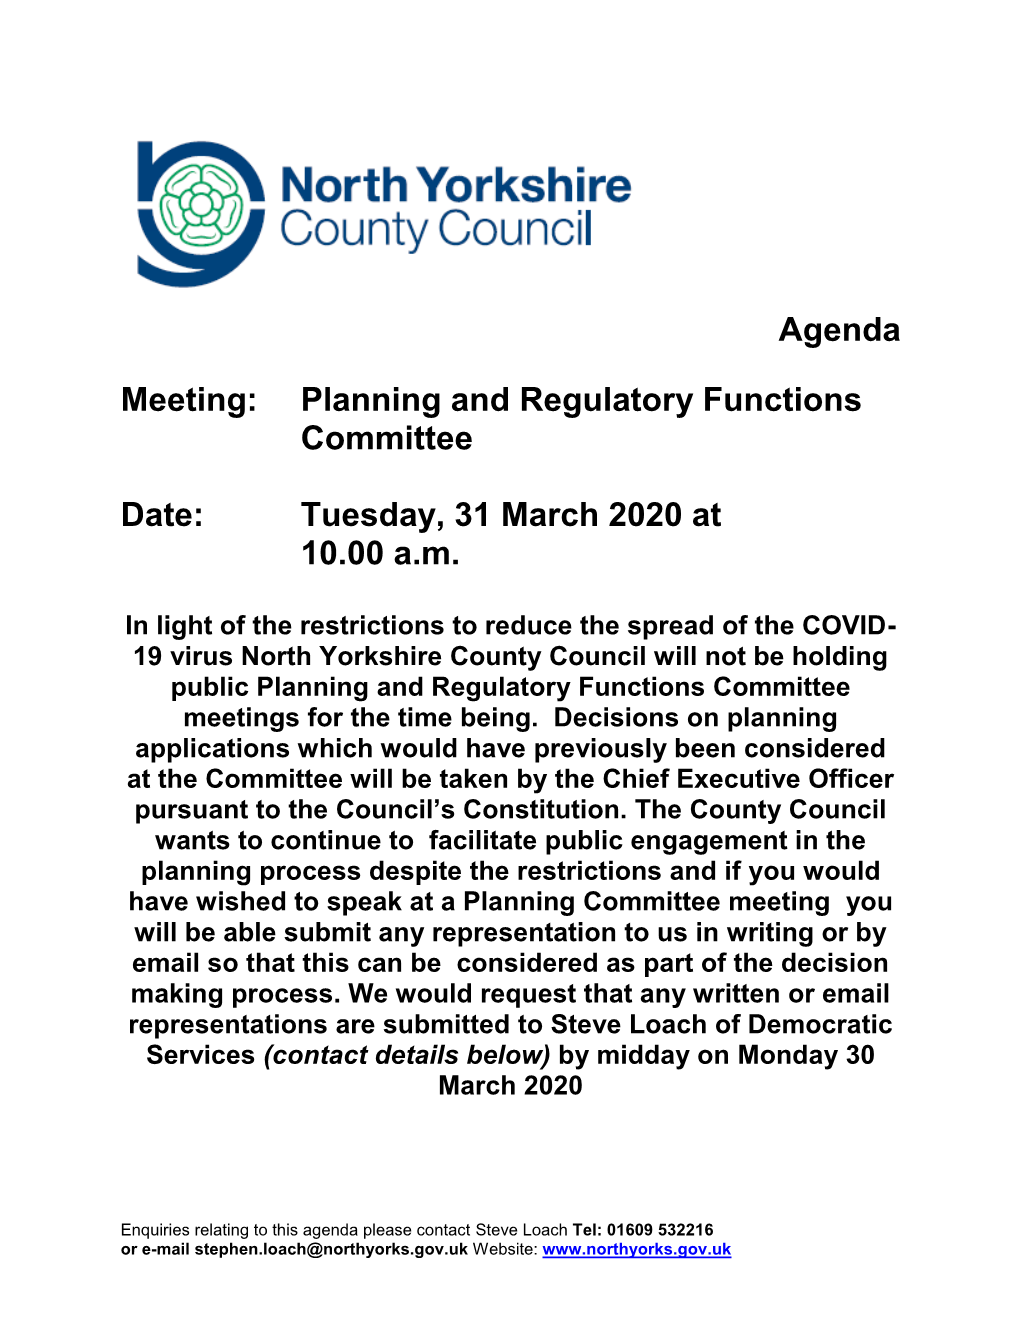 Planning and Regulatory Functions Committee Date